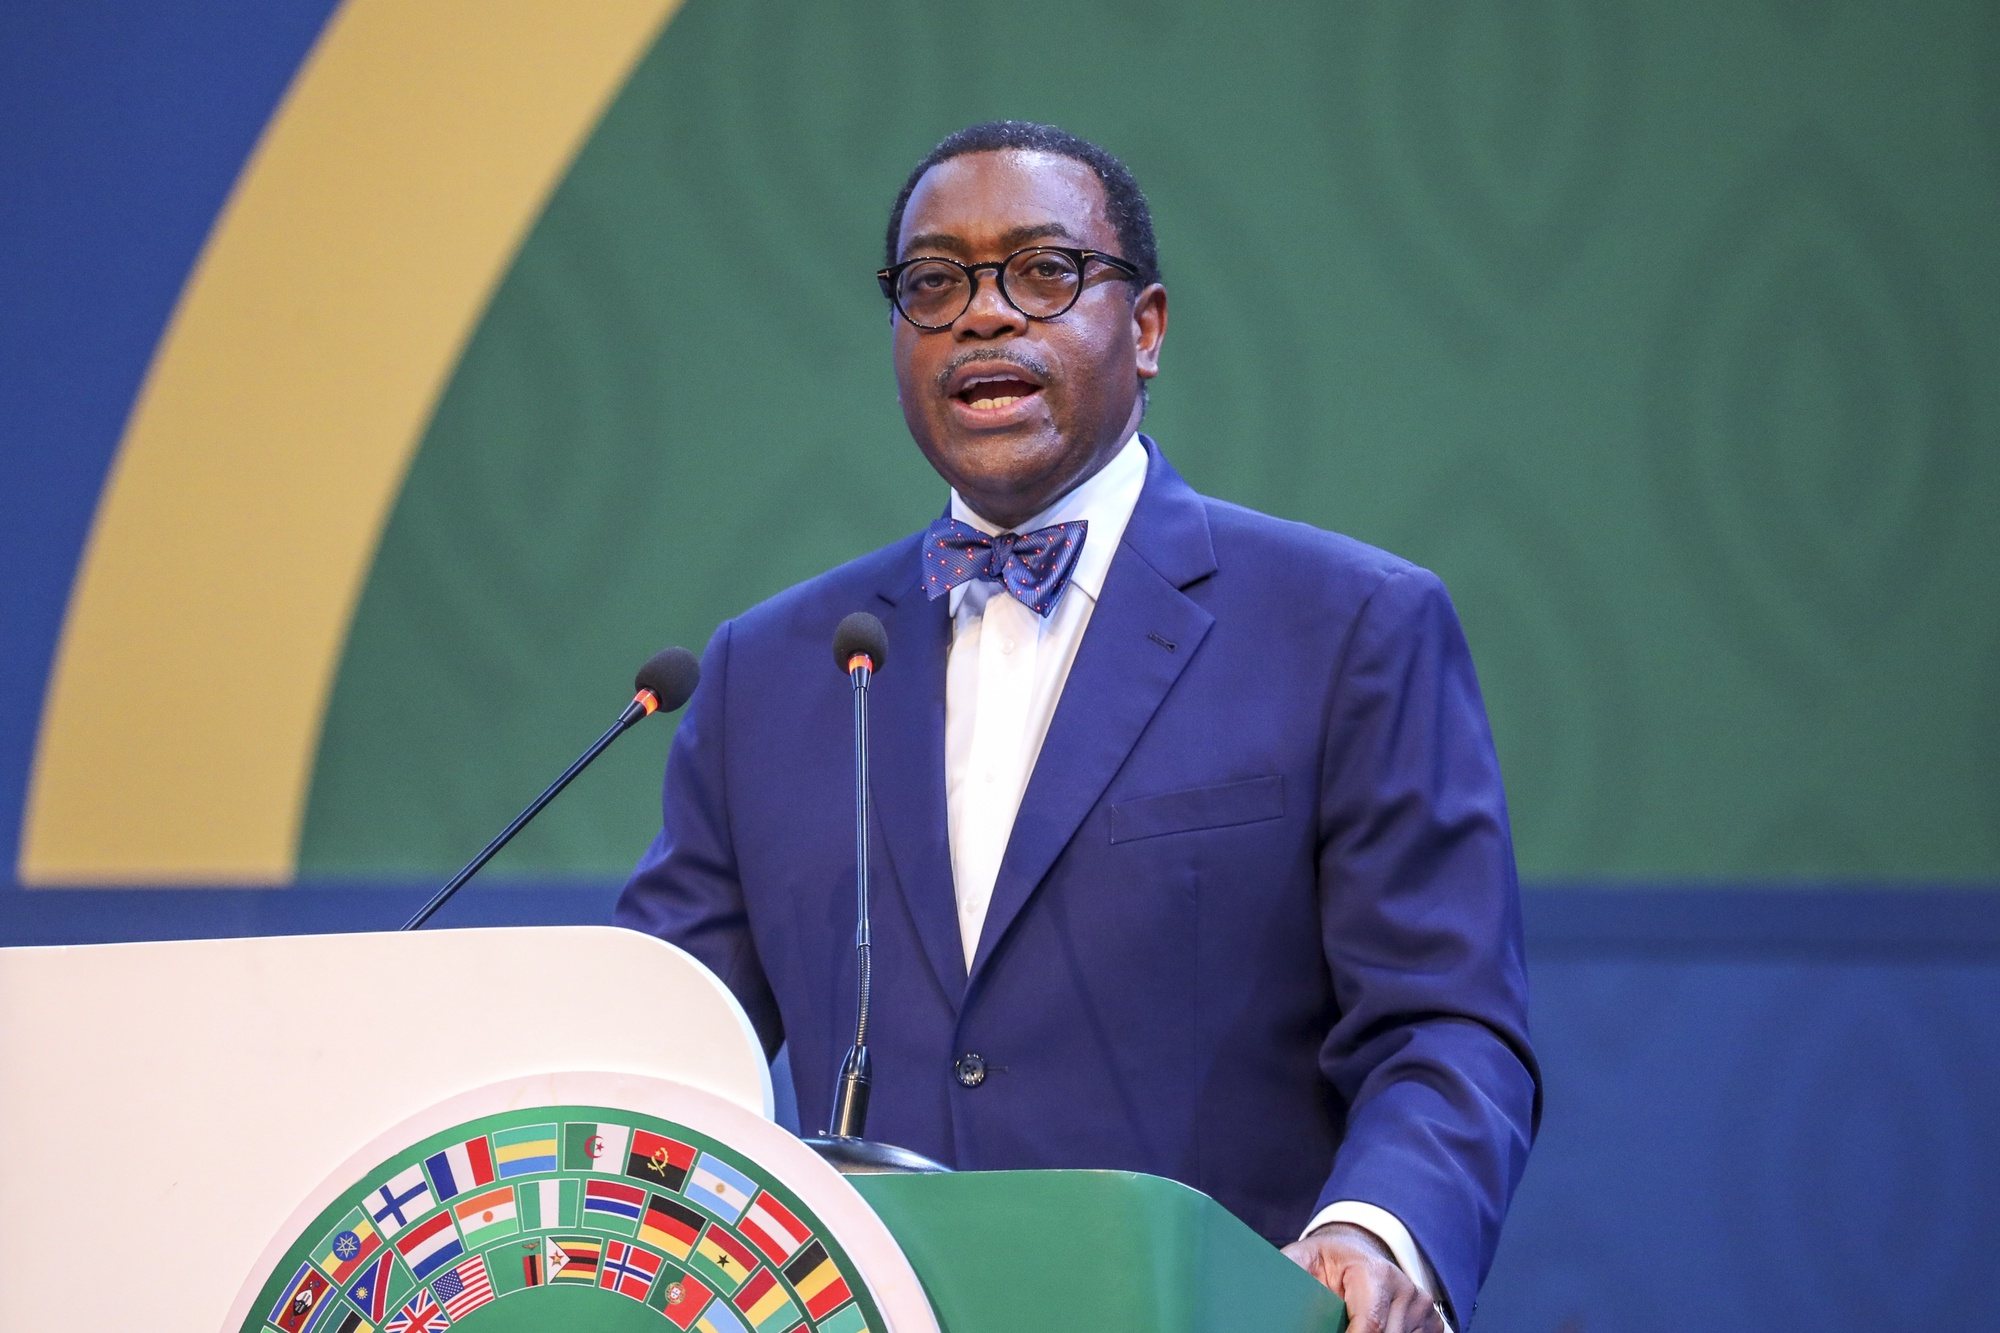 epa11378132 African Development Bank (AFDB) President Akinwumi Adesina (C) speaks during the opening ceremony of the 2024 AFDB Annual Meetings at the Kenyatta International Conference Centre (KICC), in Nairobi, Kenya, 29 May 2024. AFDB is holding Annual Meetings in Nairobi from 27 to 31 May 2024. They comprise the 59th Annual Assembly of the African Development Bank and the 50th meeting of the African Development Fund. Up to 3,000 delegates, including African heads of state, ministers and central bank governors among those gathered at the event to discuss the theme “Africa’s Transformation, the African Development Bank Group, and the Reform of the Global Financial Architecture”.  EPA/Daniel Irungu